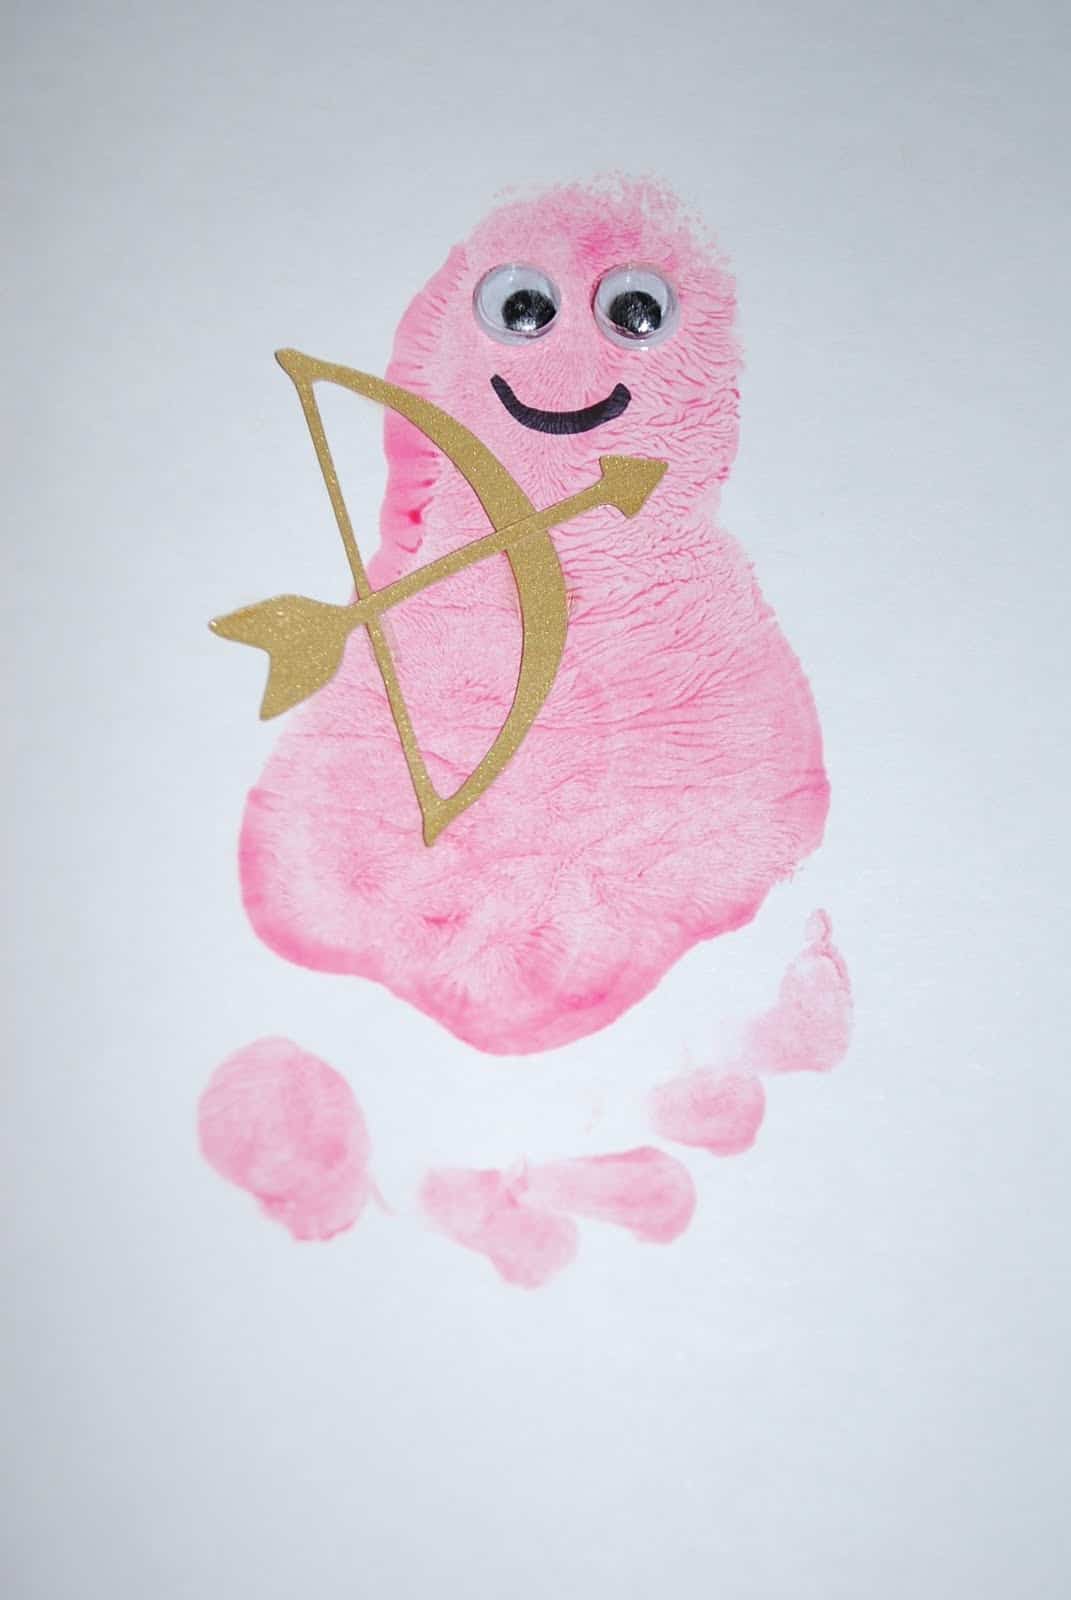 Getting Ready for Valentine's Day: 15 Cute Cupid Themed Crafts